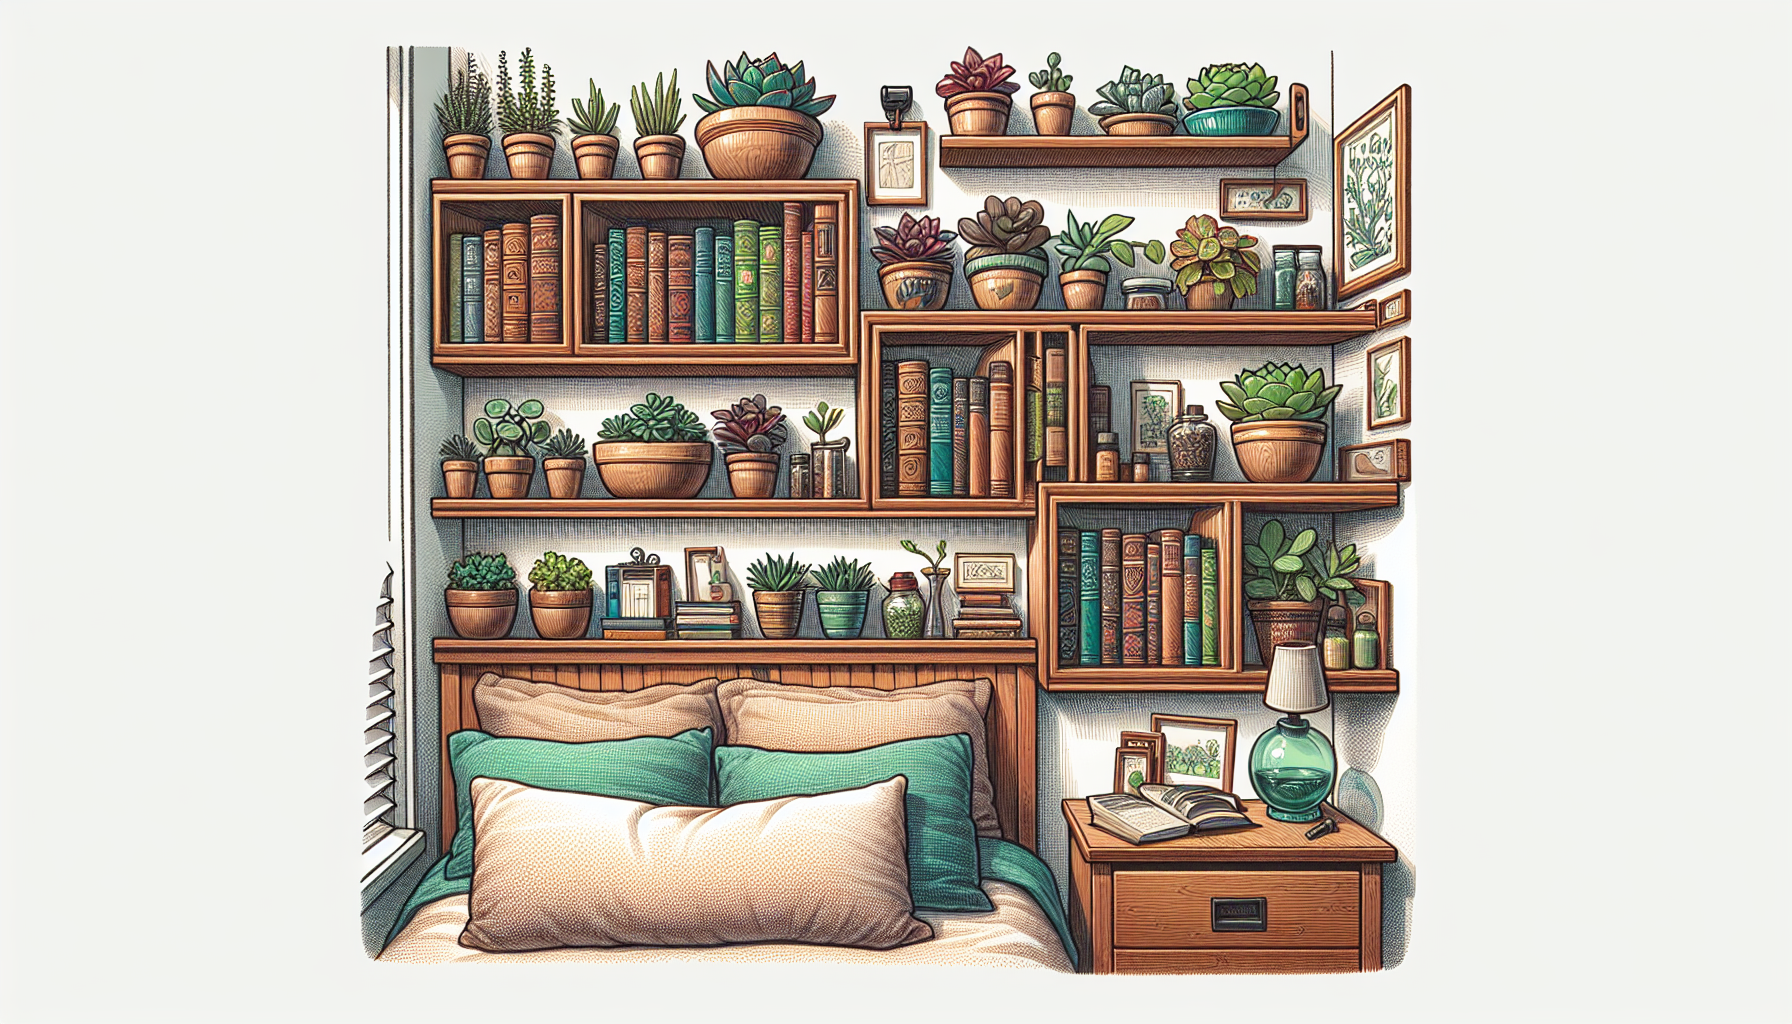 Illustration of wall-mounted shelves in a small bedroom